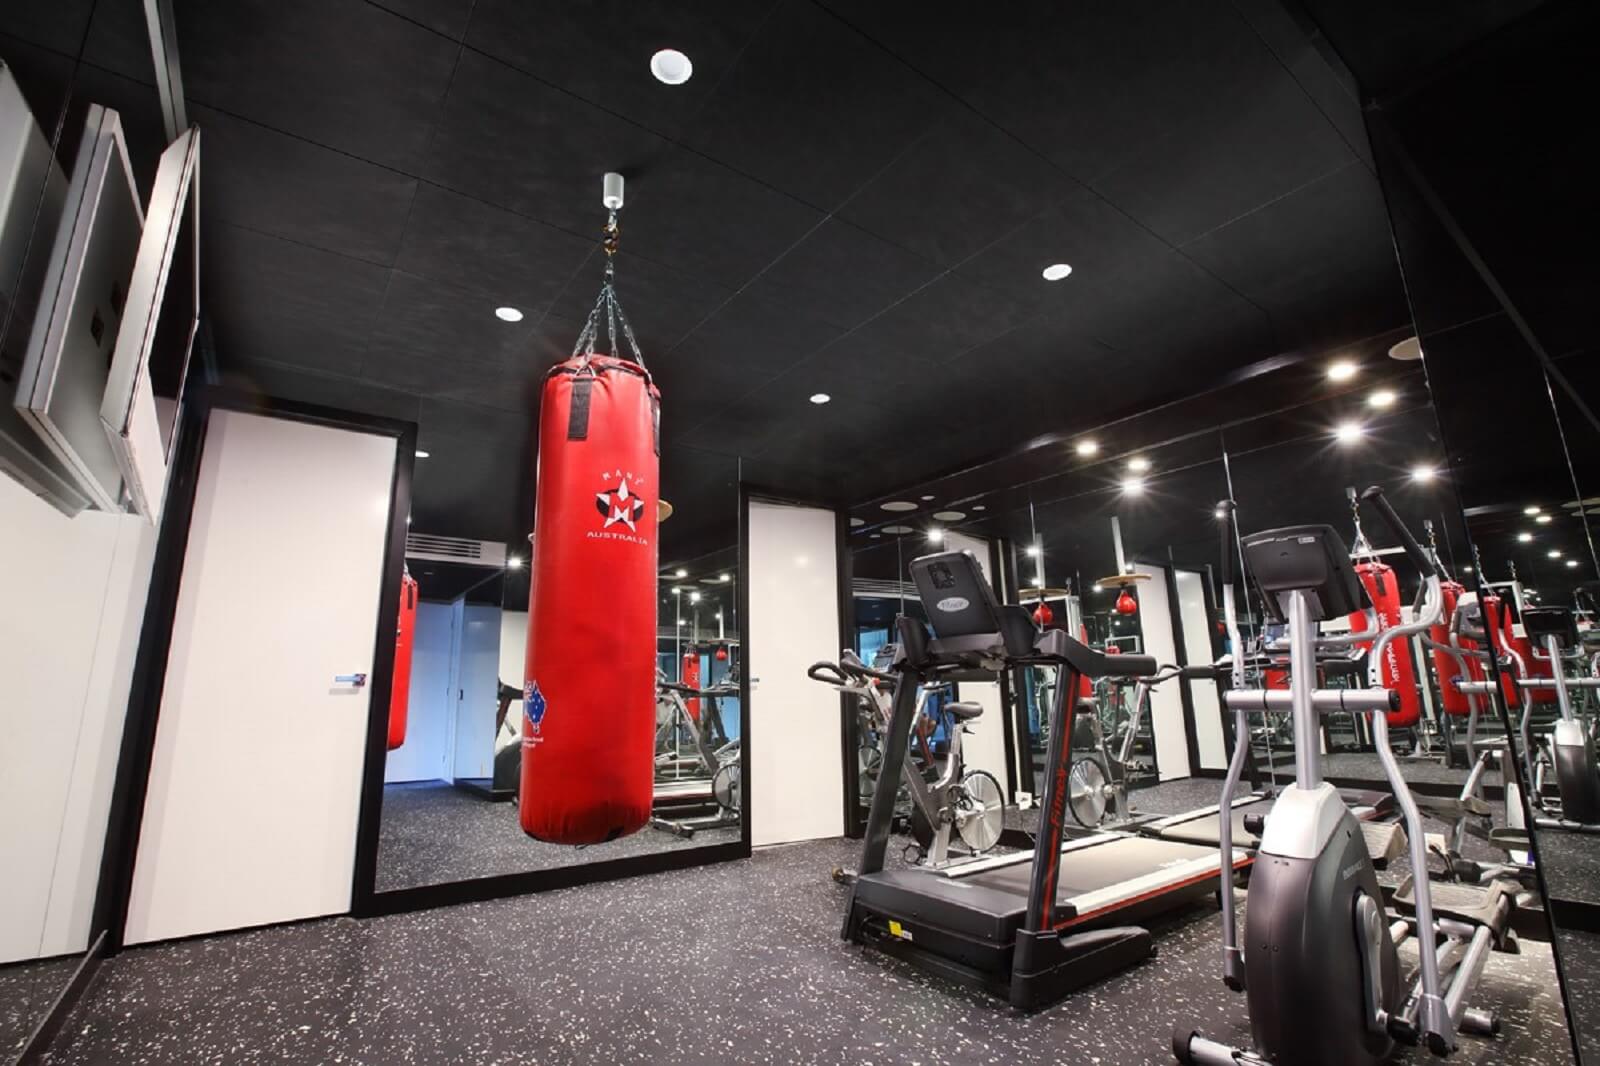 The Toorak home auomation meant the home gym with a red punching back hanging in the centre of the room was climate controlled. Treadmill and bikes sit in the background